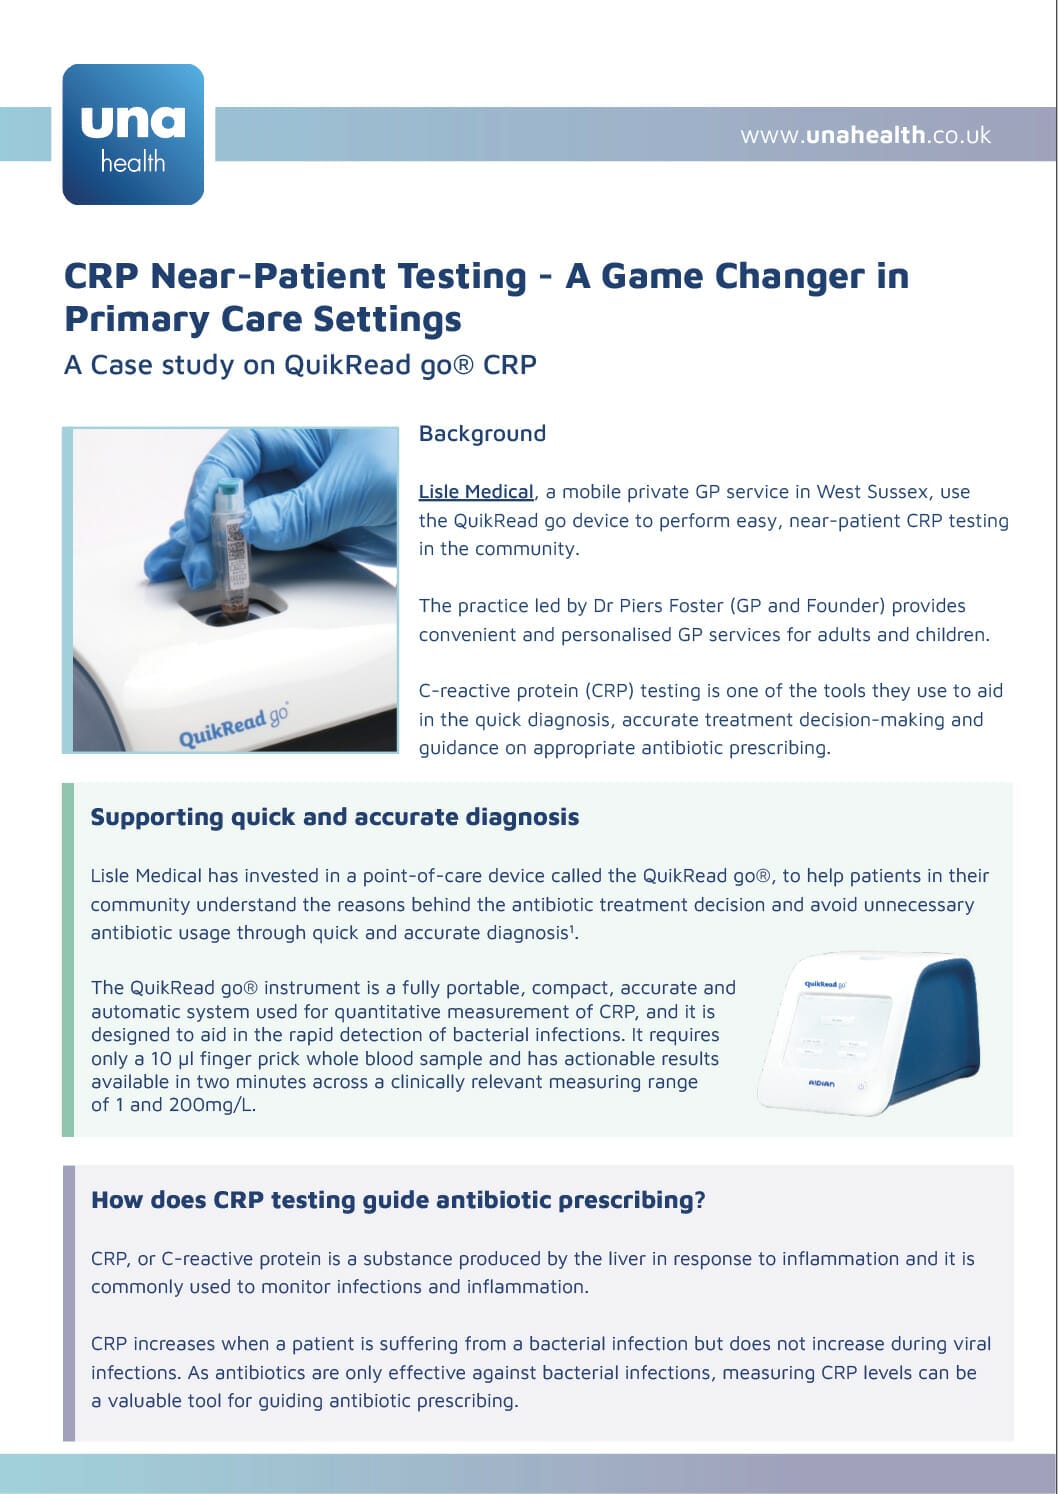 Case Study - CRP-Near-Patient-Testing-A-Game-Changer-in-Primary-Care-Settings